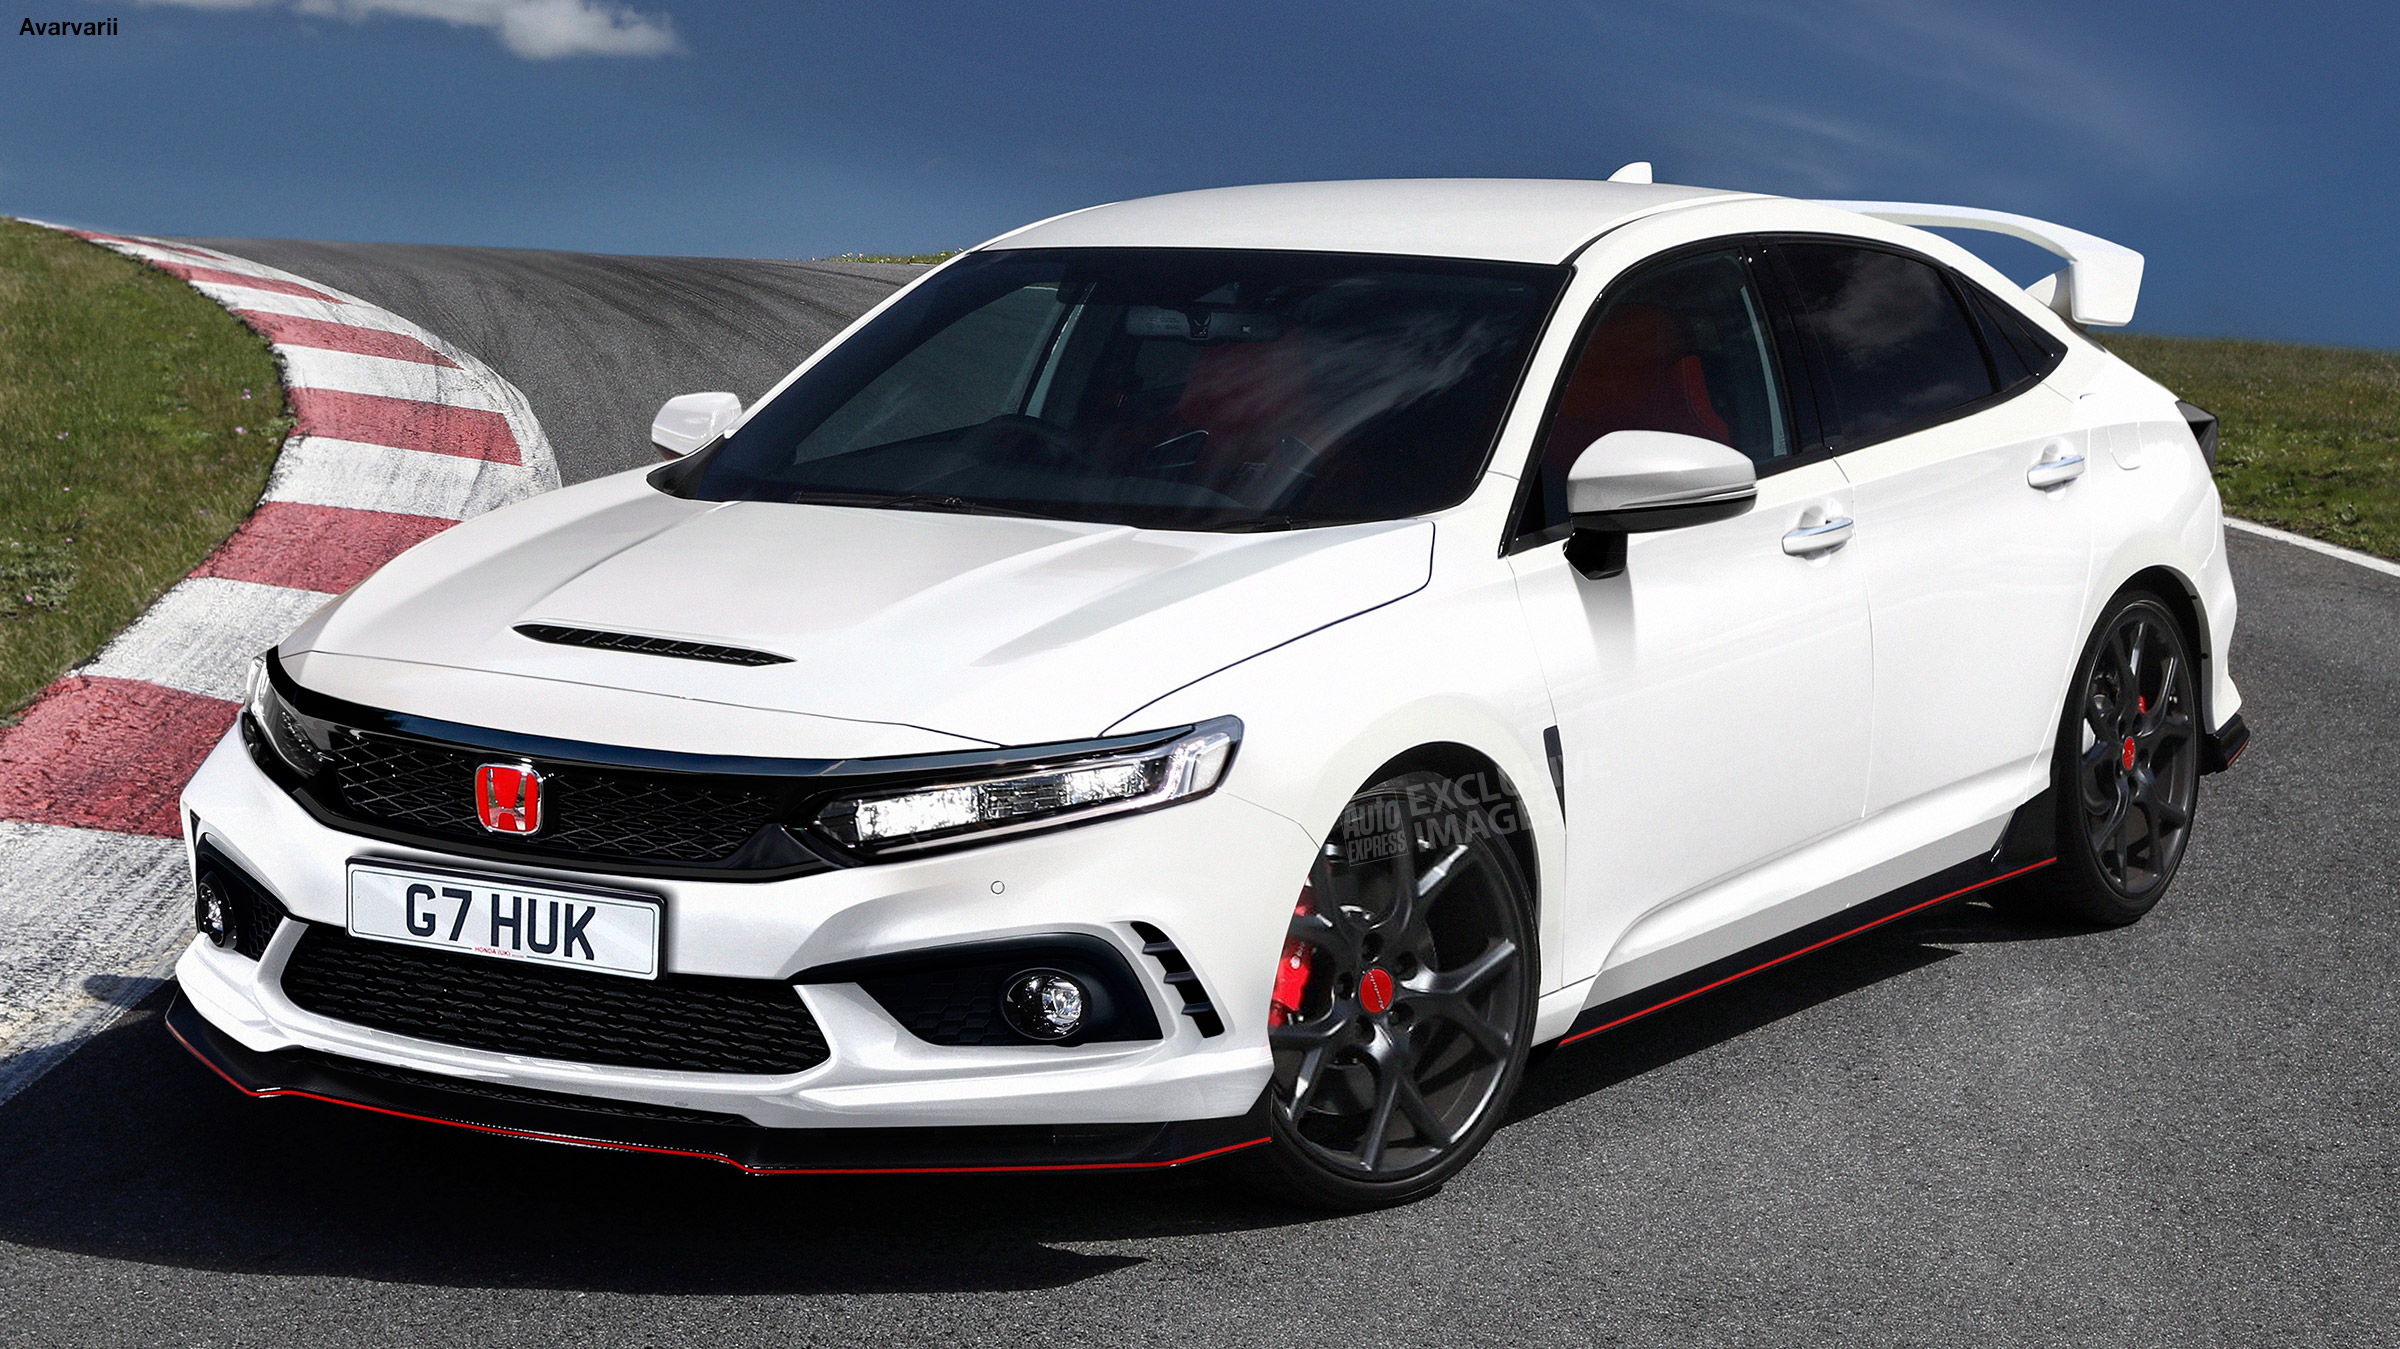 New 2022 Honda Civic Type R hot hatch set to stick with tradition